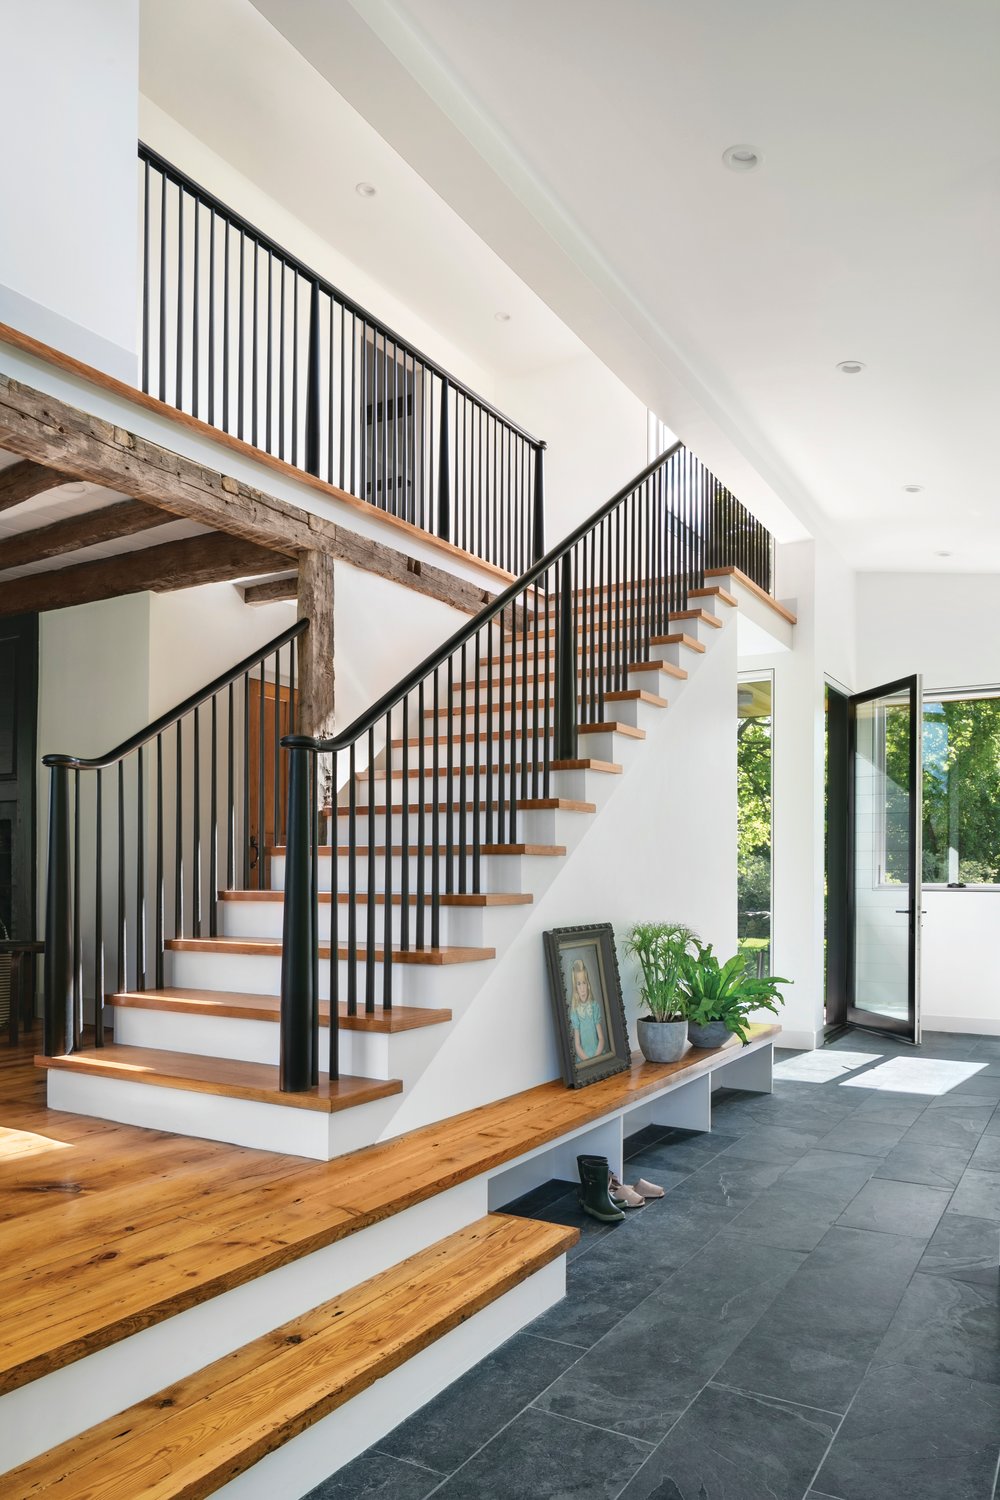 The entryway from the driveway into the home begins the transitions between modern and historic. Note that the primary level of the home actually becomes a convenient bench as it extends toward the door.